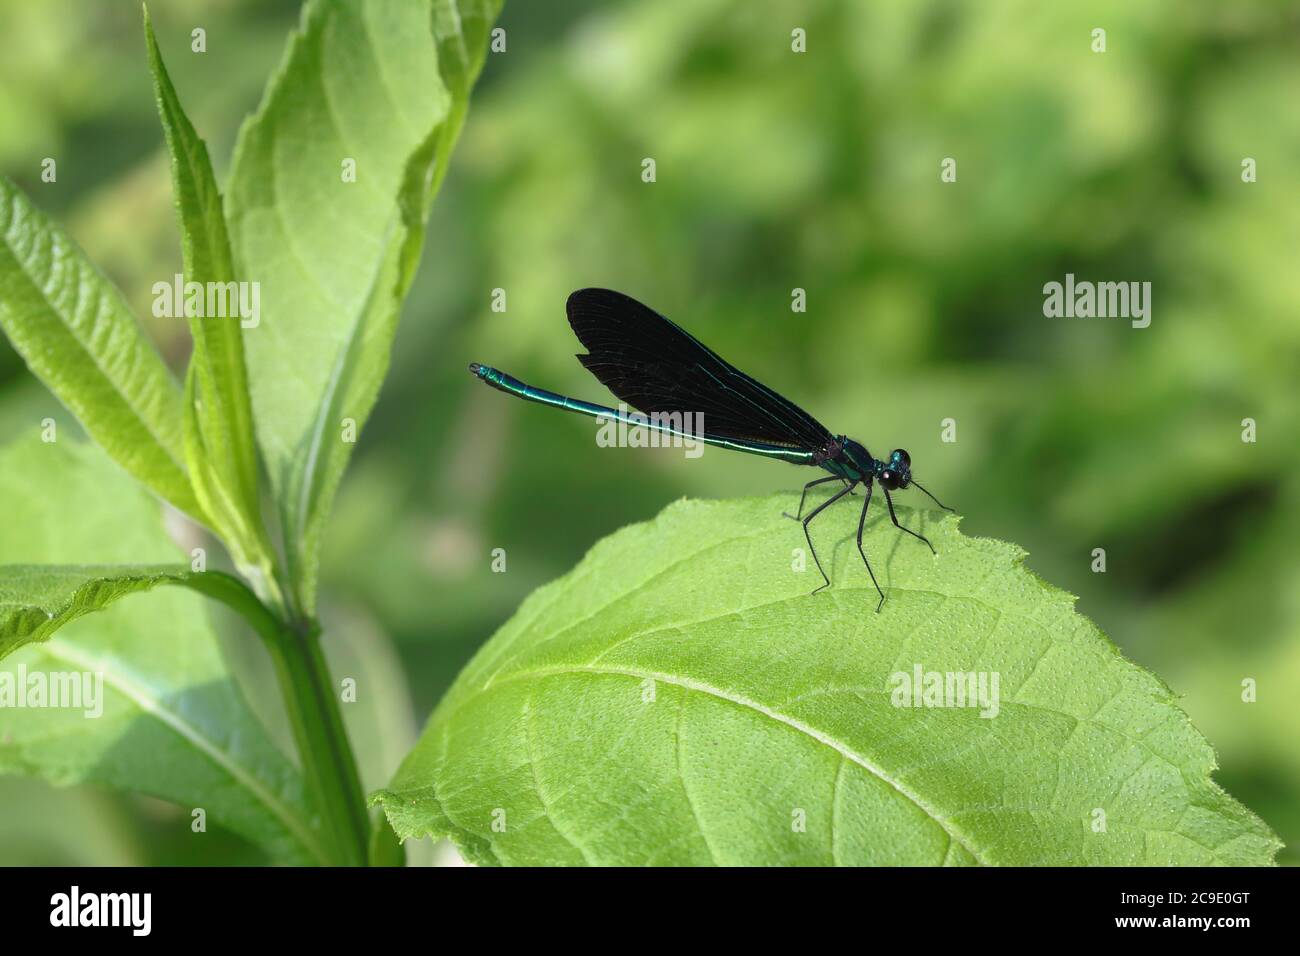 Ebony jewelwing damselfly isolated on a green leaf with green background. Stock Photo